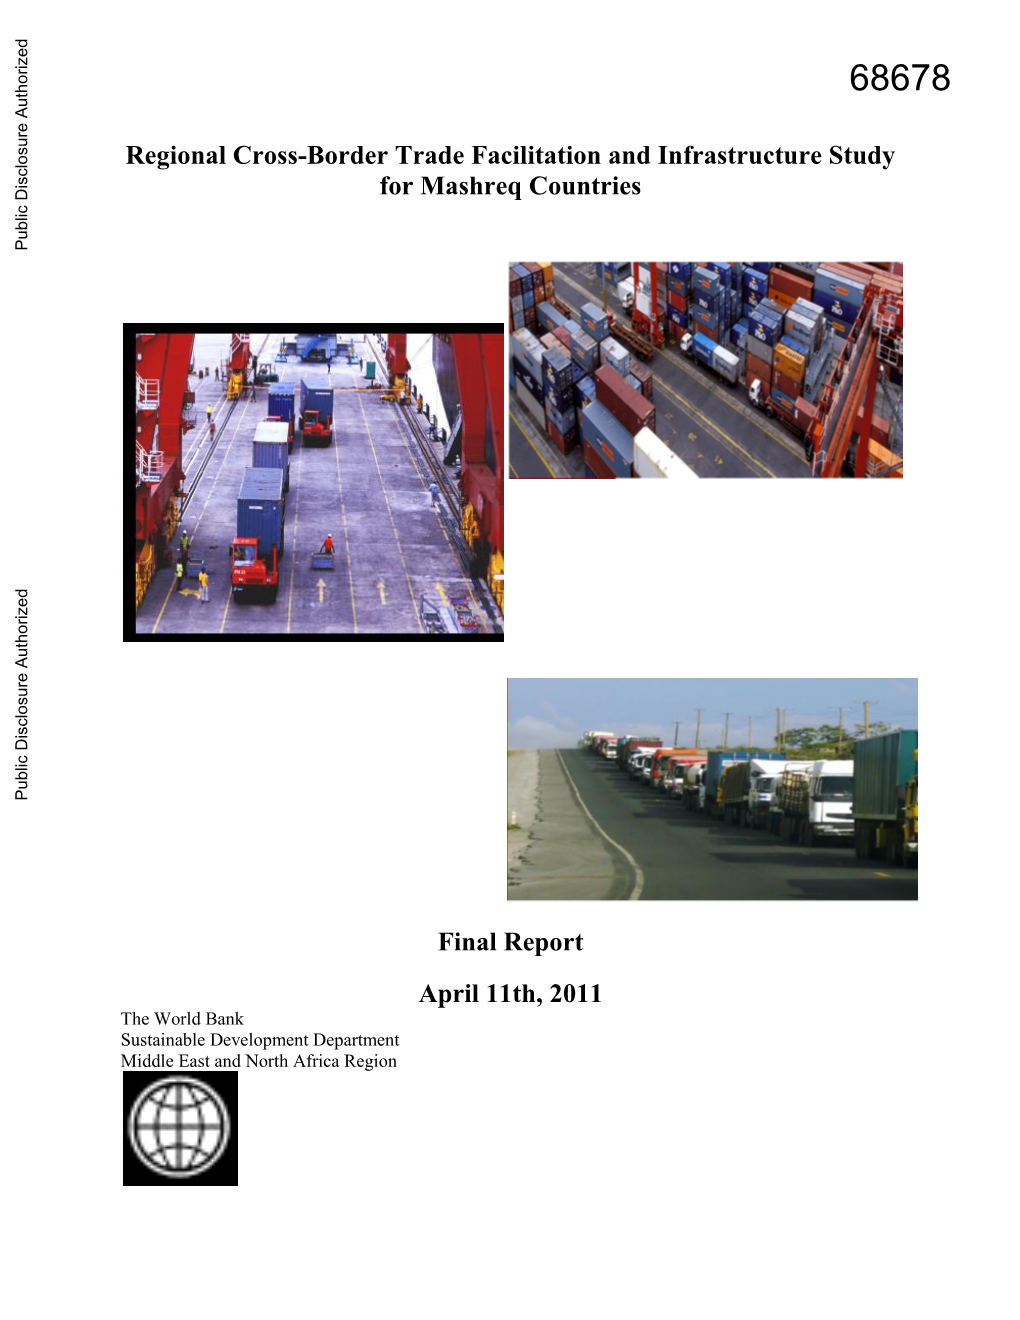 Regional Cross-Border Trade Facilitation and Infrastructure Study for Mashreq Countries